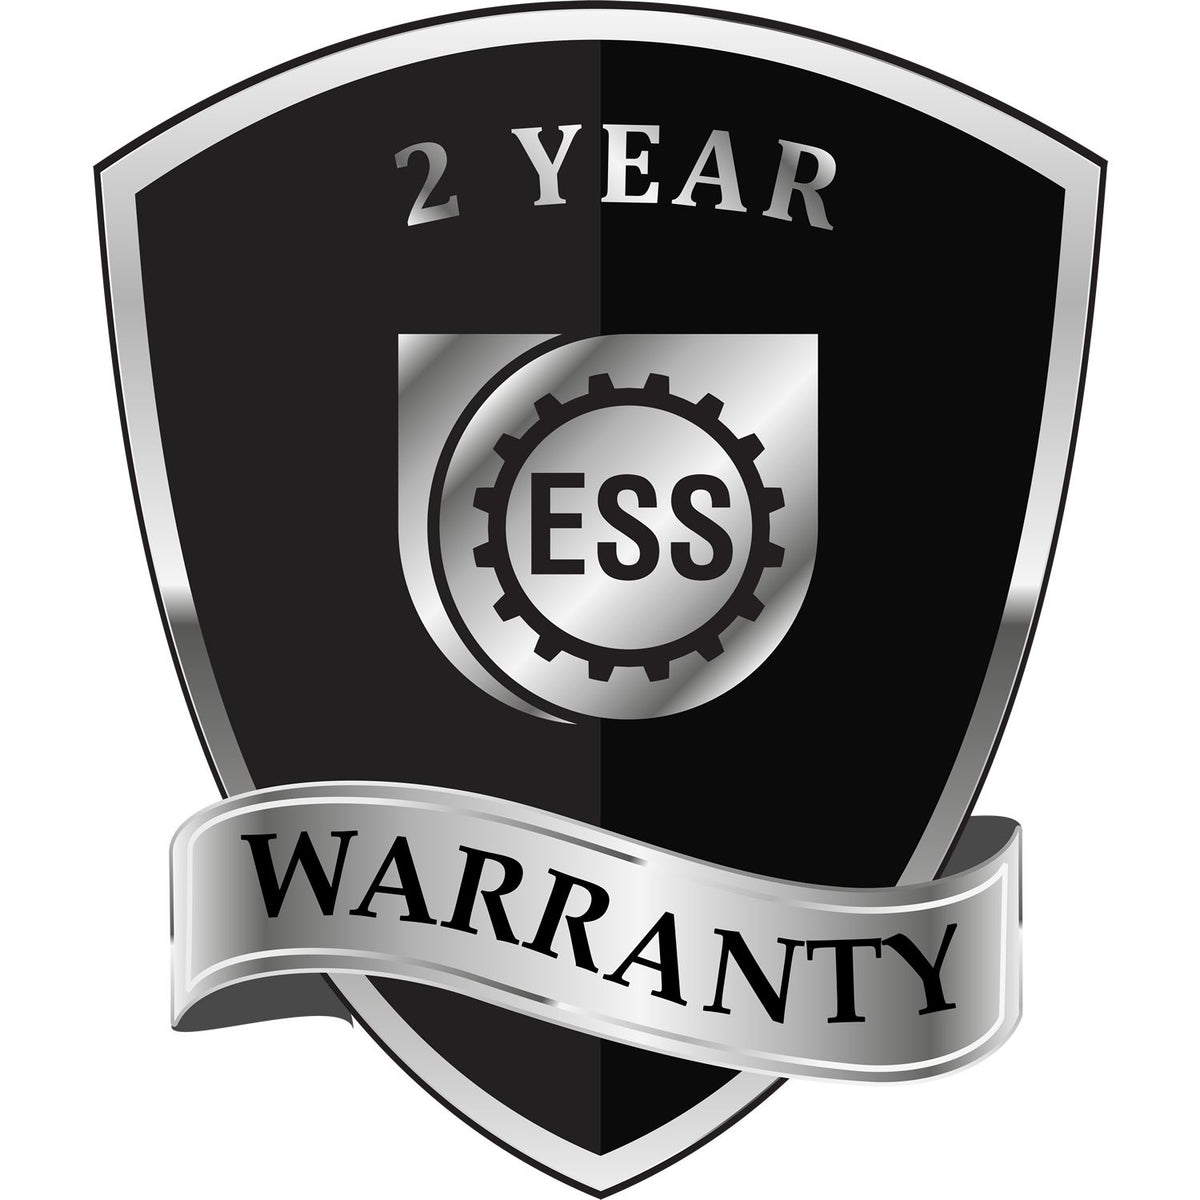 A black and silver badge or emblem showing warranty information for the Gift South Dakota Engineer Seal